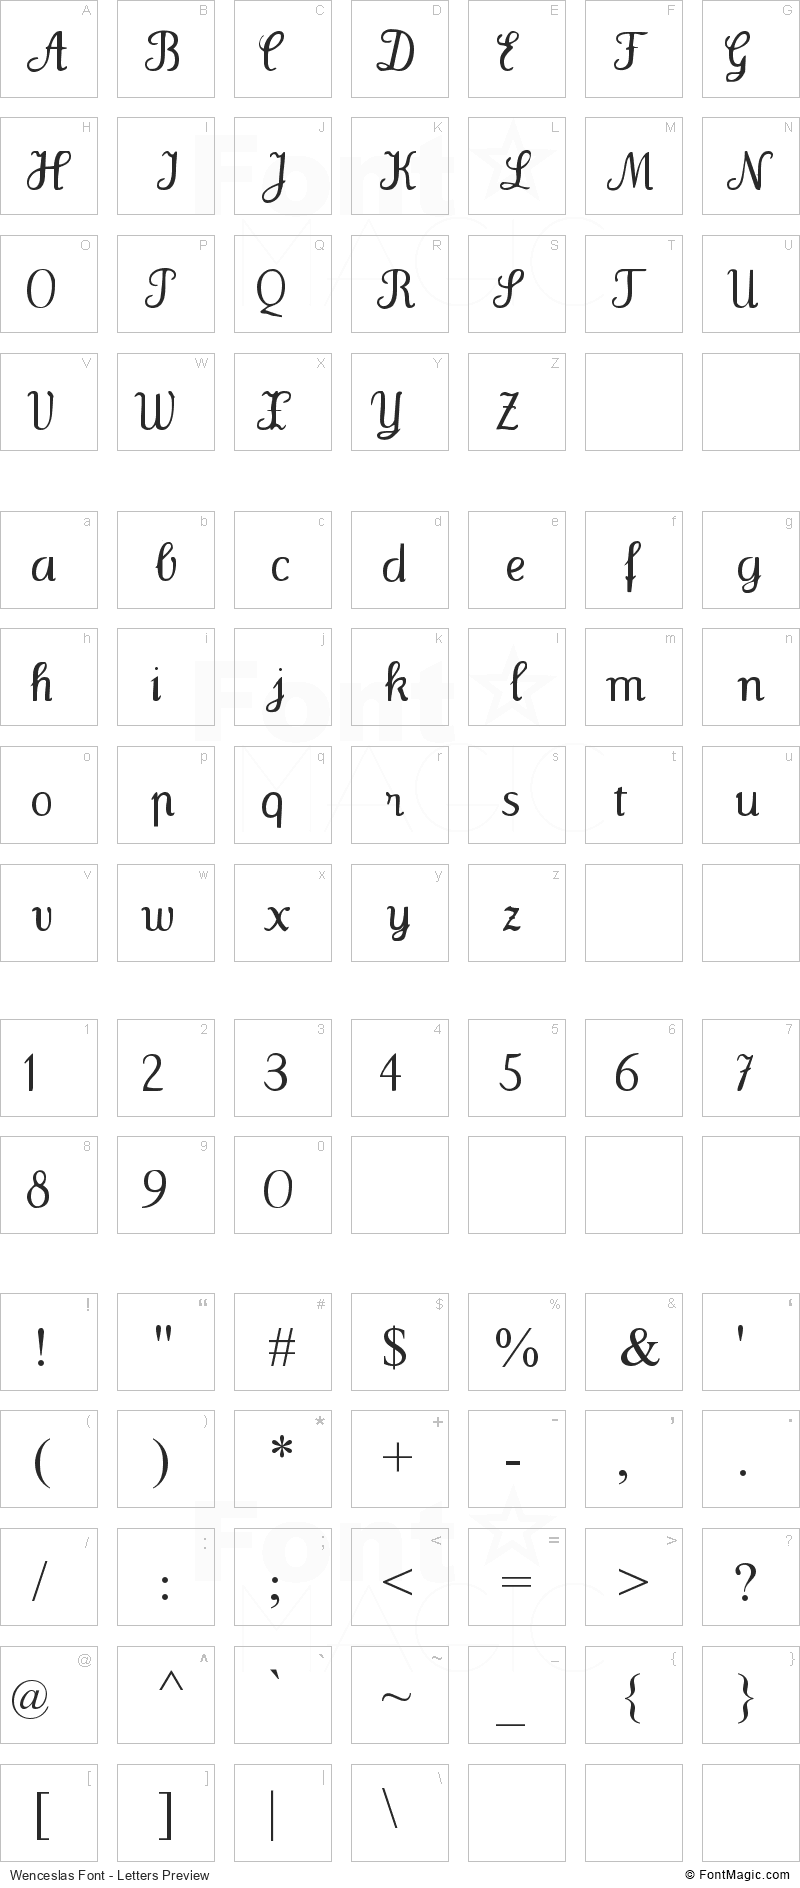 Wenceslas Font - All Latters Preview Chart